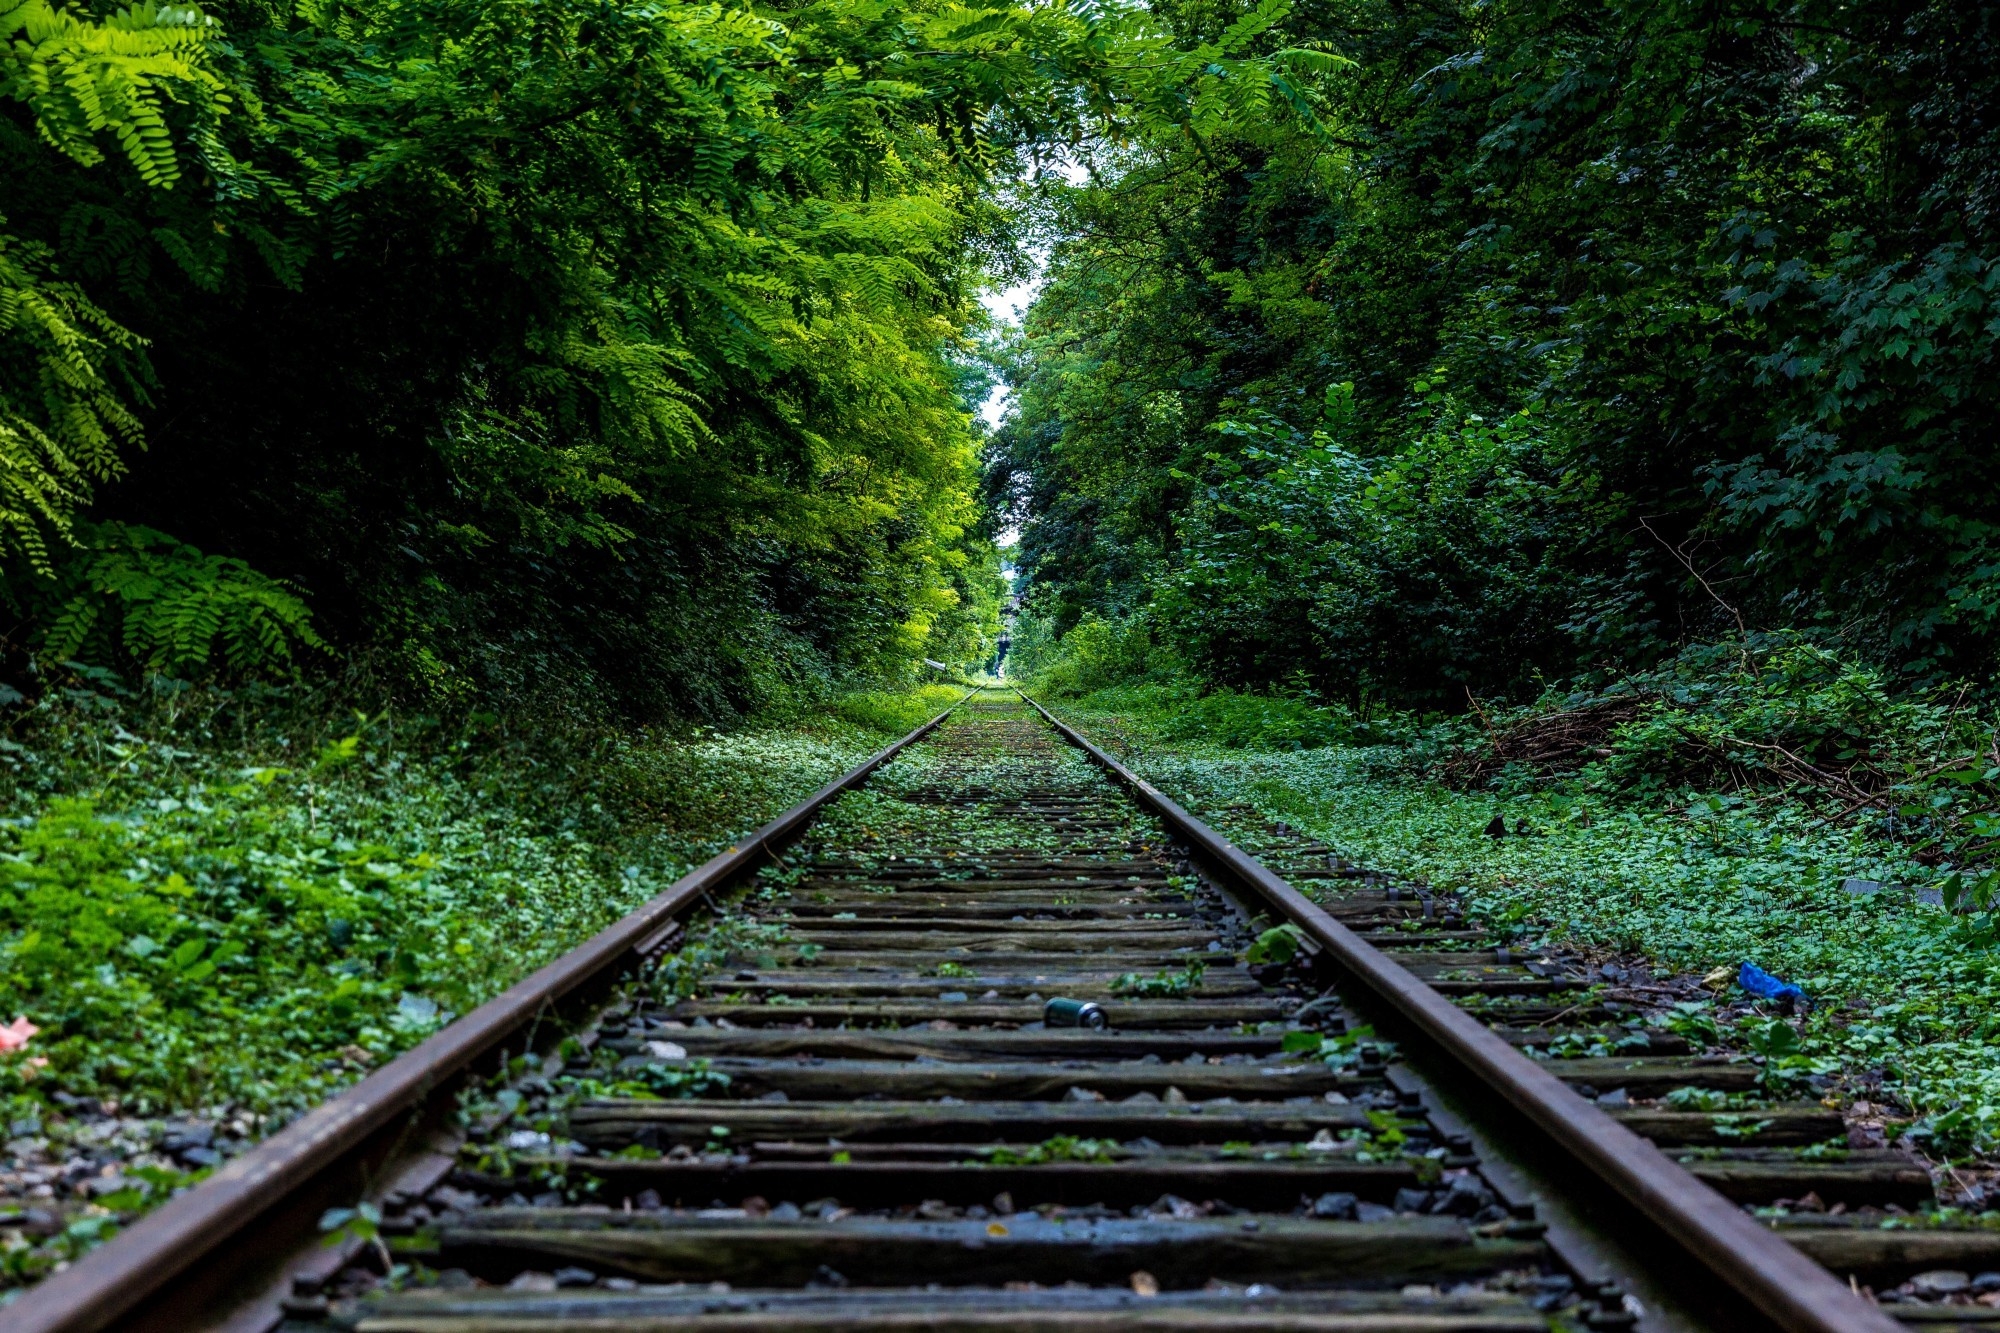 Railroad along the forest with green foliage